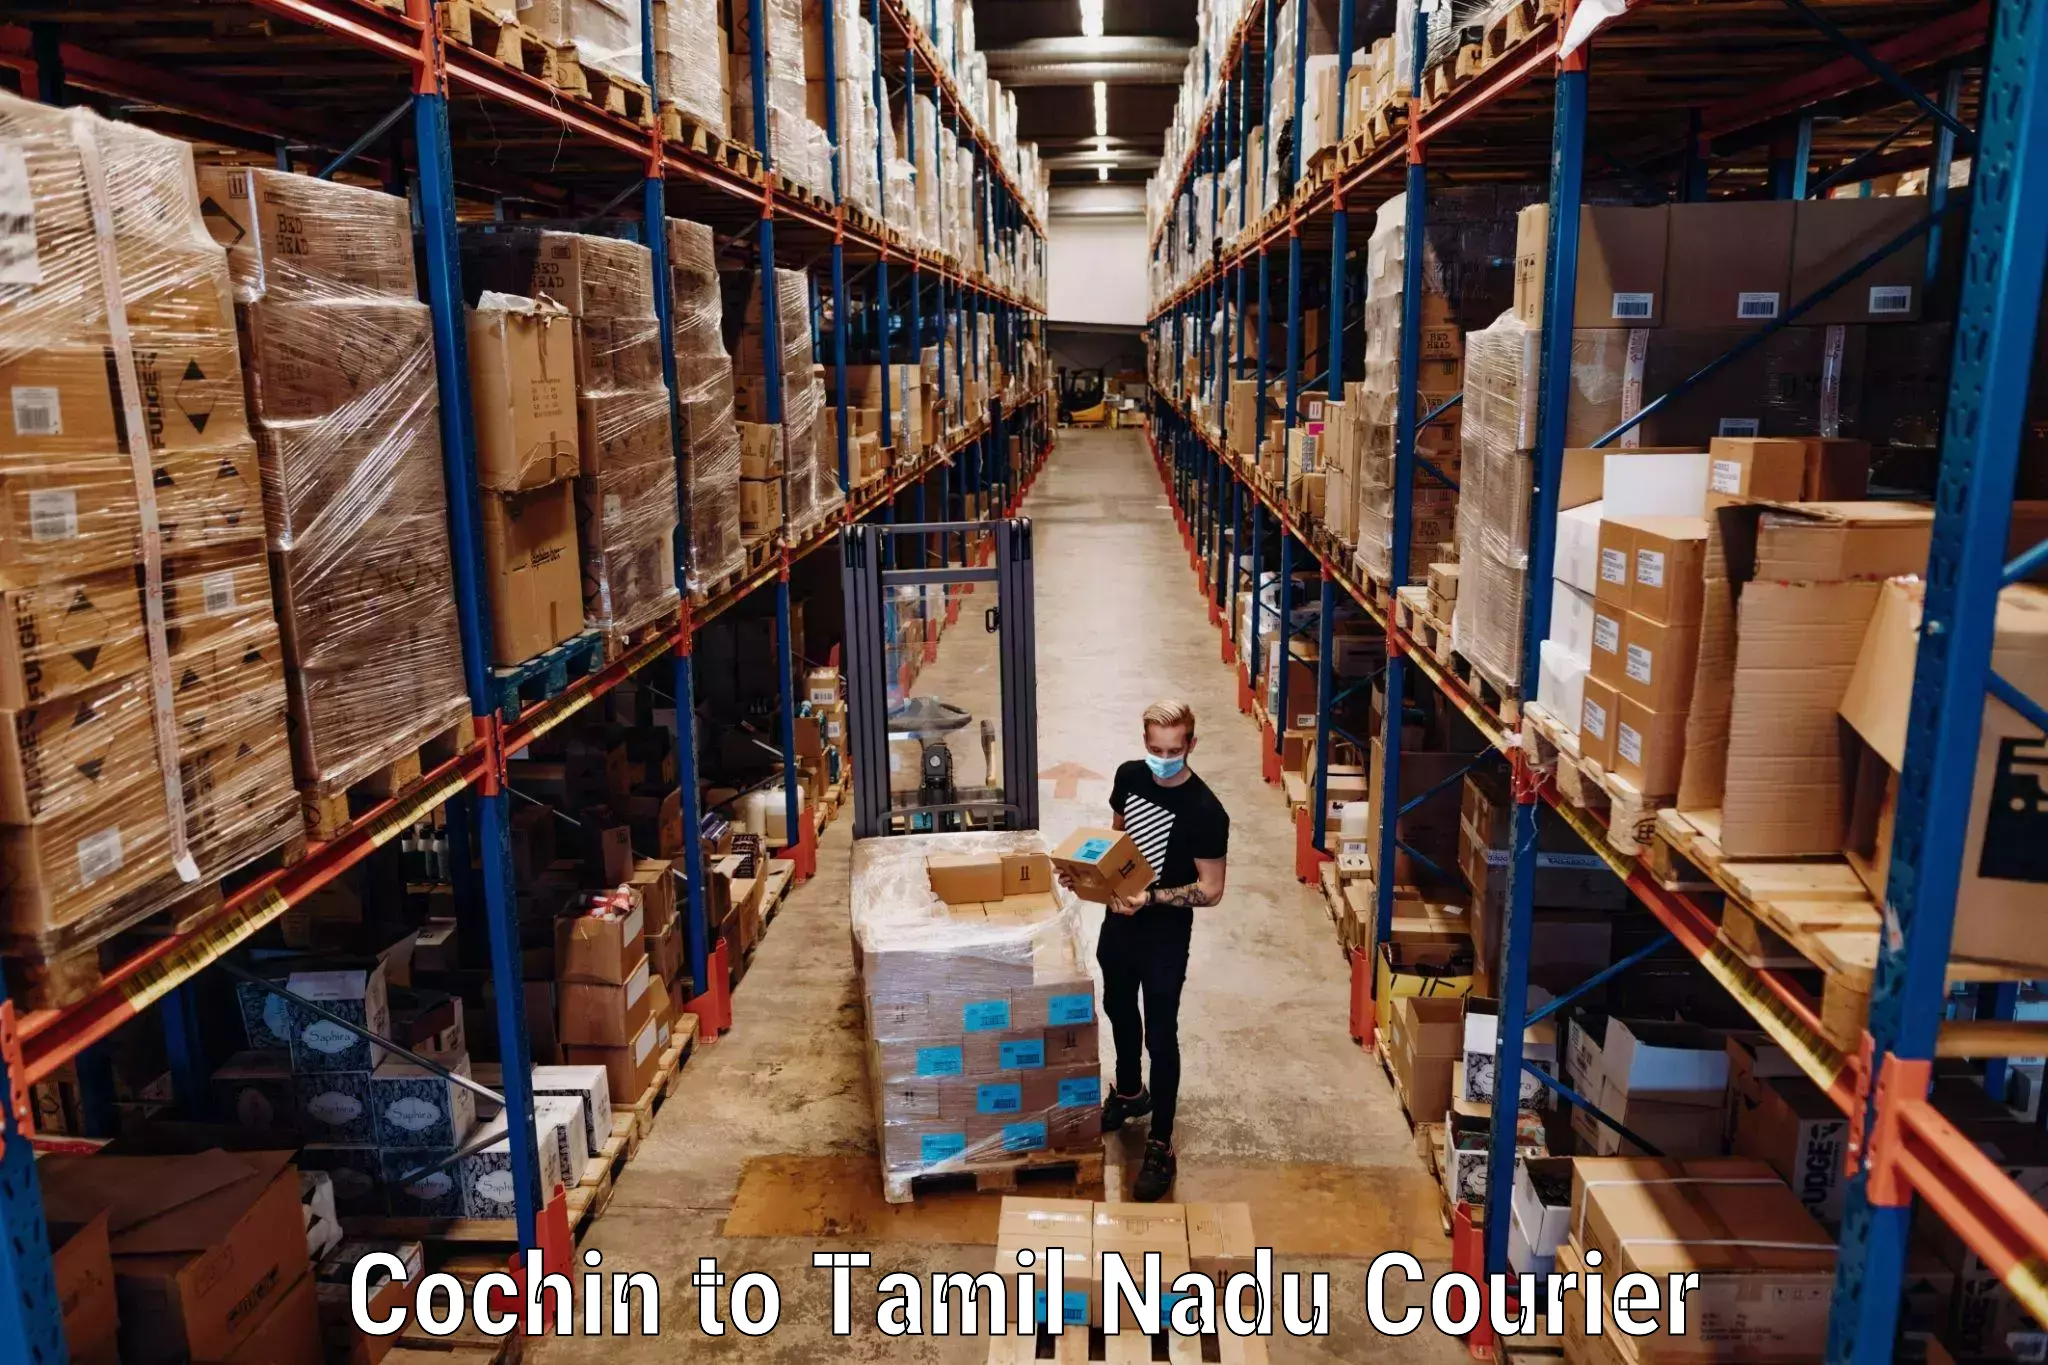 Luggage shipping specialists Cochin to Tamil Nadu